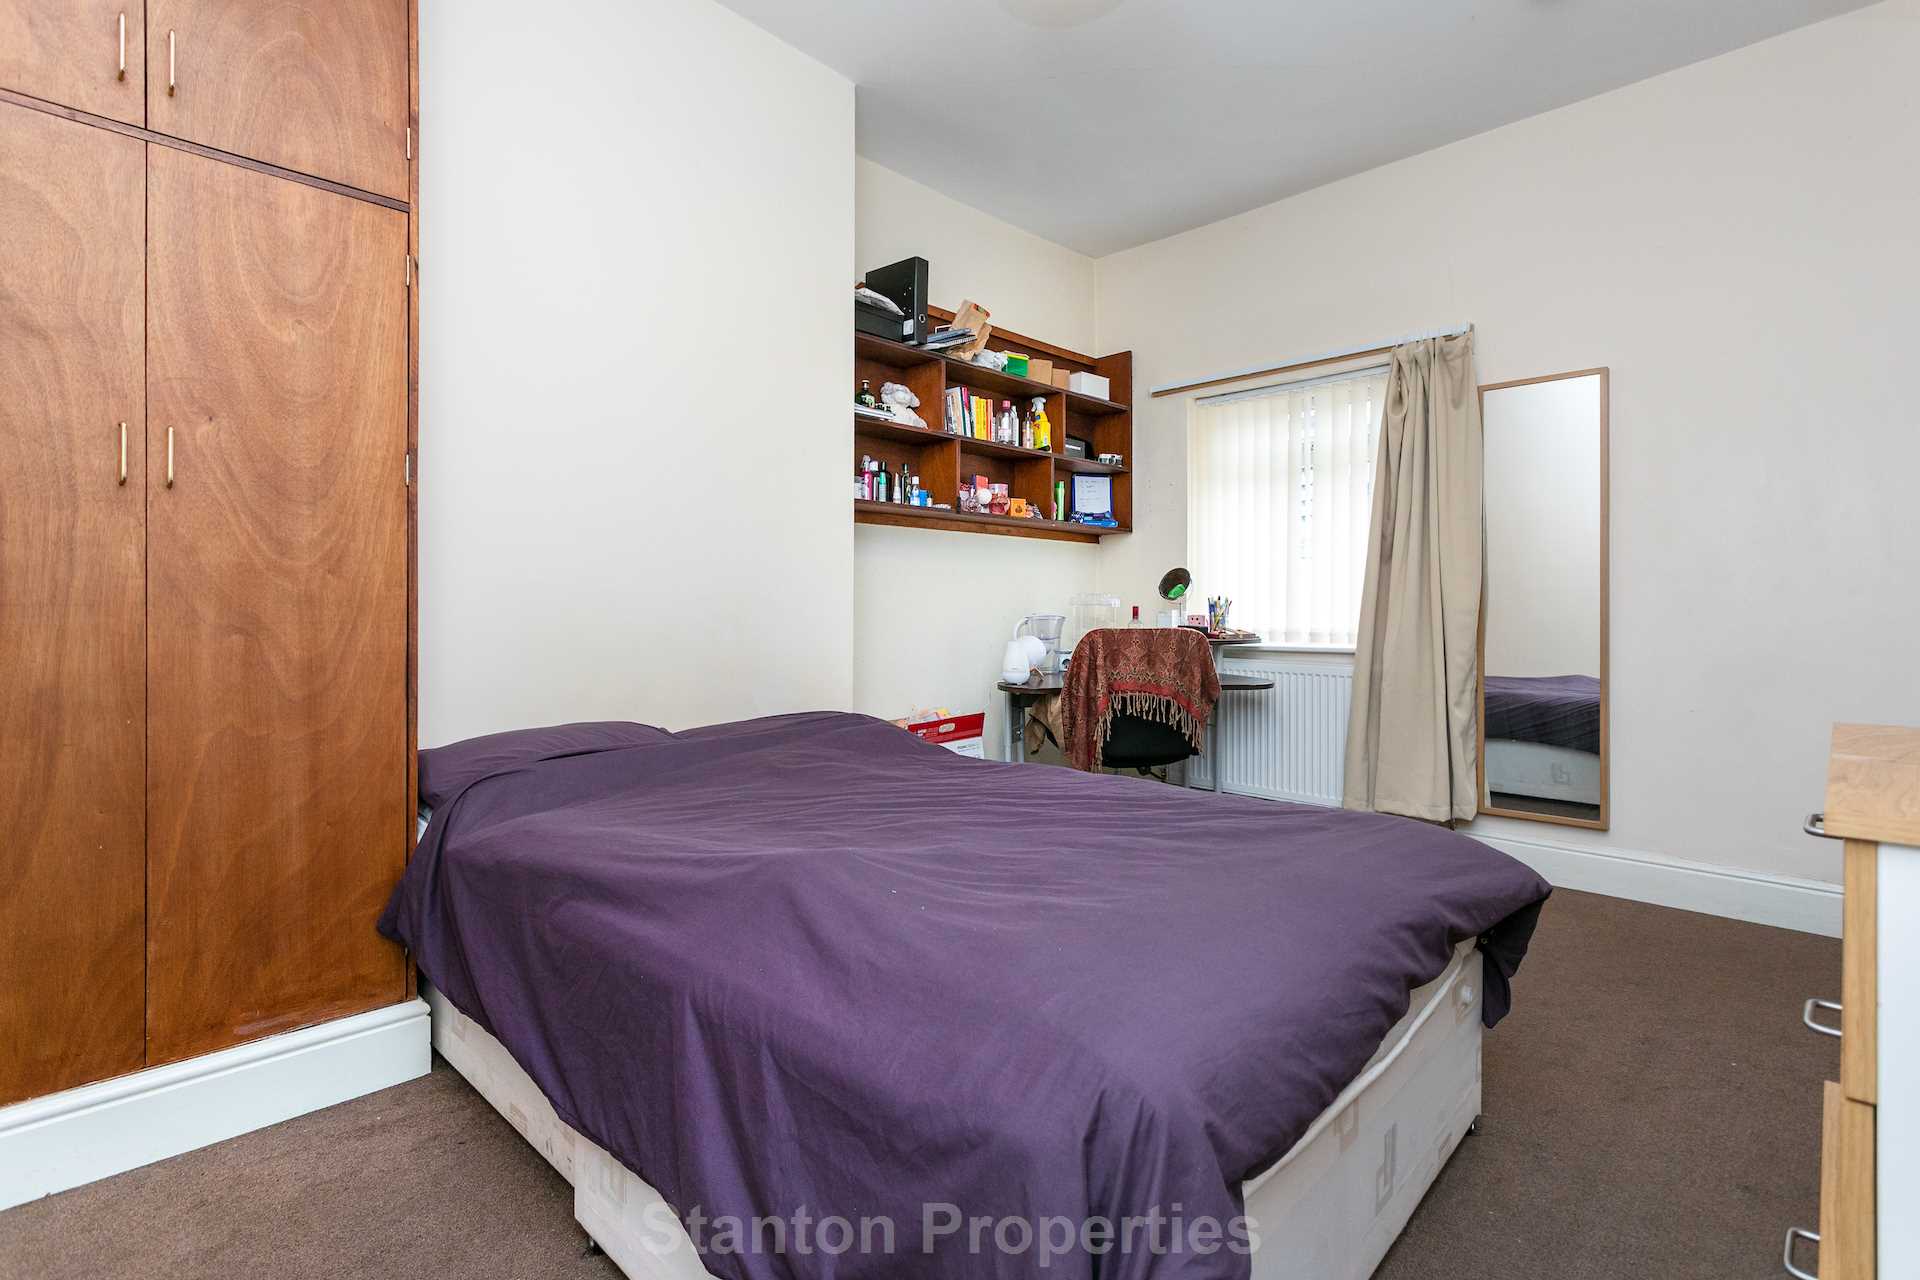 £112 pppw, Wallace Avenue, Rusholme, Image 15